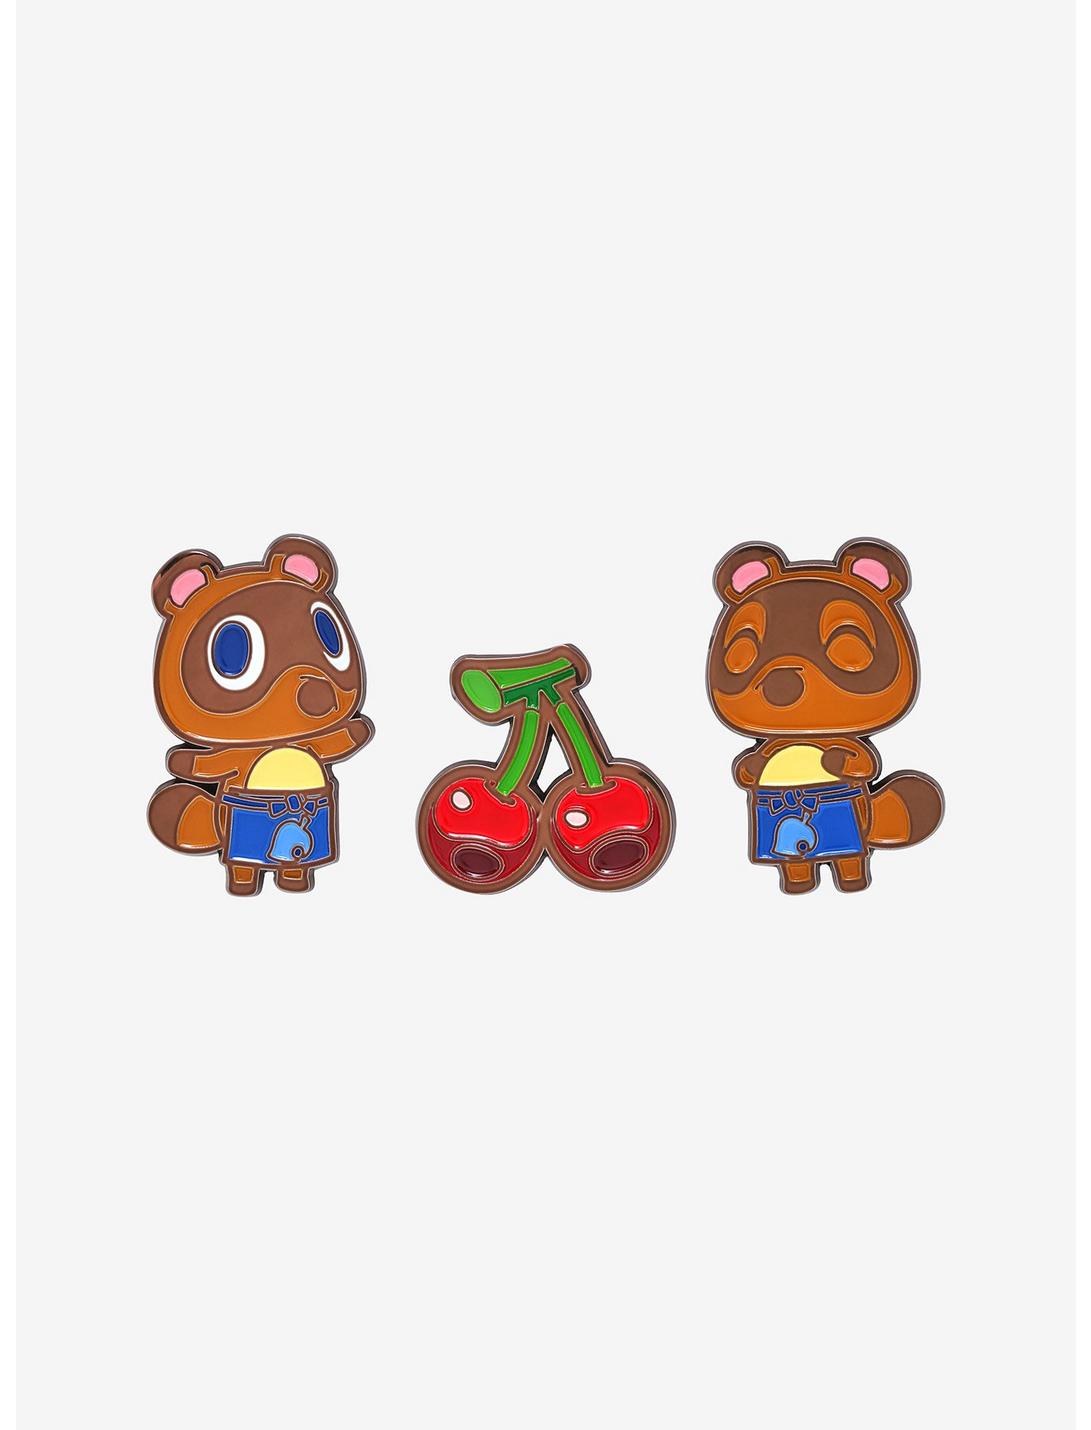 Nintendo Animal Crossing: New Horizons Timmy & Tommy Cherries Enamel Pin Set - BoxLunch Exclusive, , hi-res